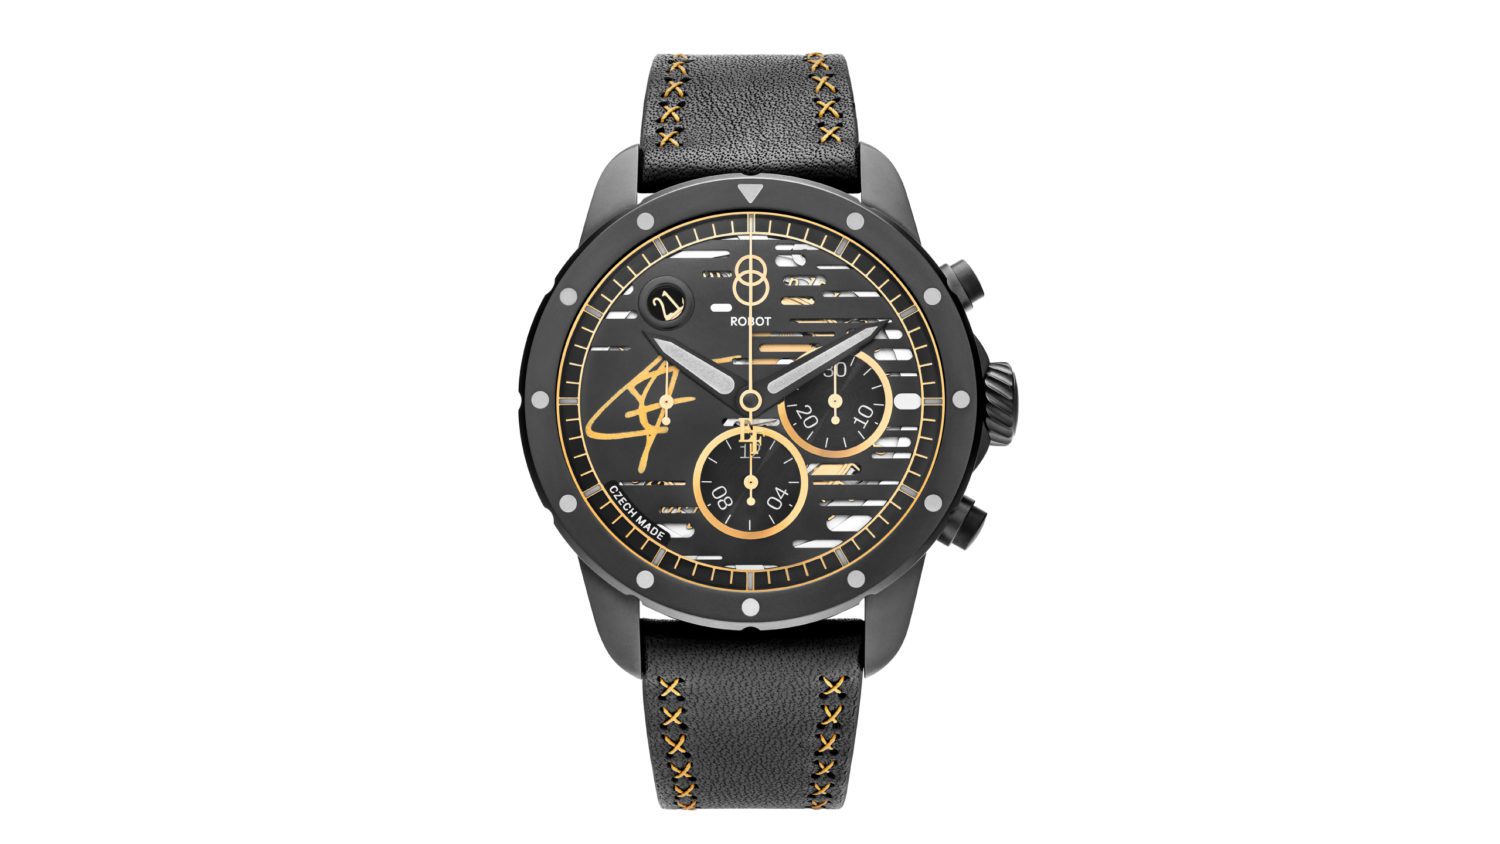 The ROBOT Minor Emerson Fittipaldi Limited Edition watch is a true masterpiece for a passionate racer. Designed with Emerson Fittipaldi’s active involvement, powered by a Swiss movement, and inspired by his black and gold colour scheme with reference to his Lotus Car in the livery of JPS, the team’s title sponsor. Each of the 100 specially perforated dials carries Emerson Fittipaldi’s original signature. Get ready to own a piece of racing history! 